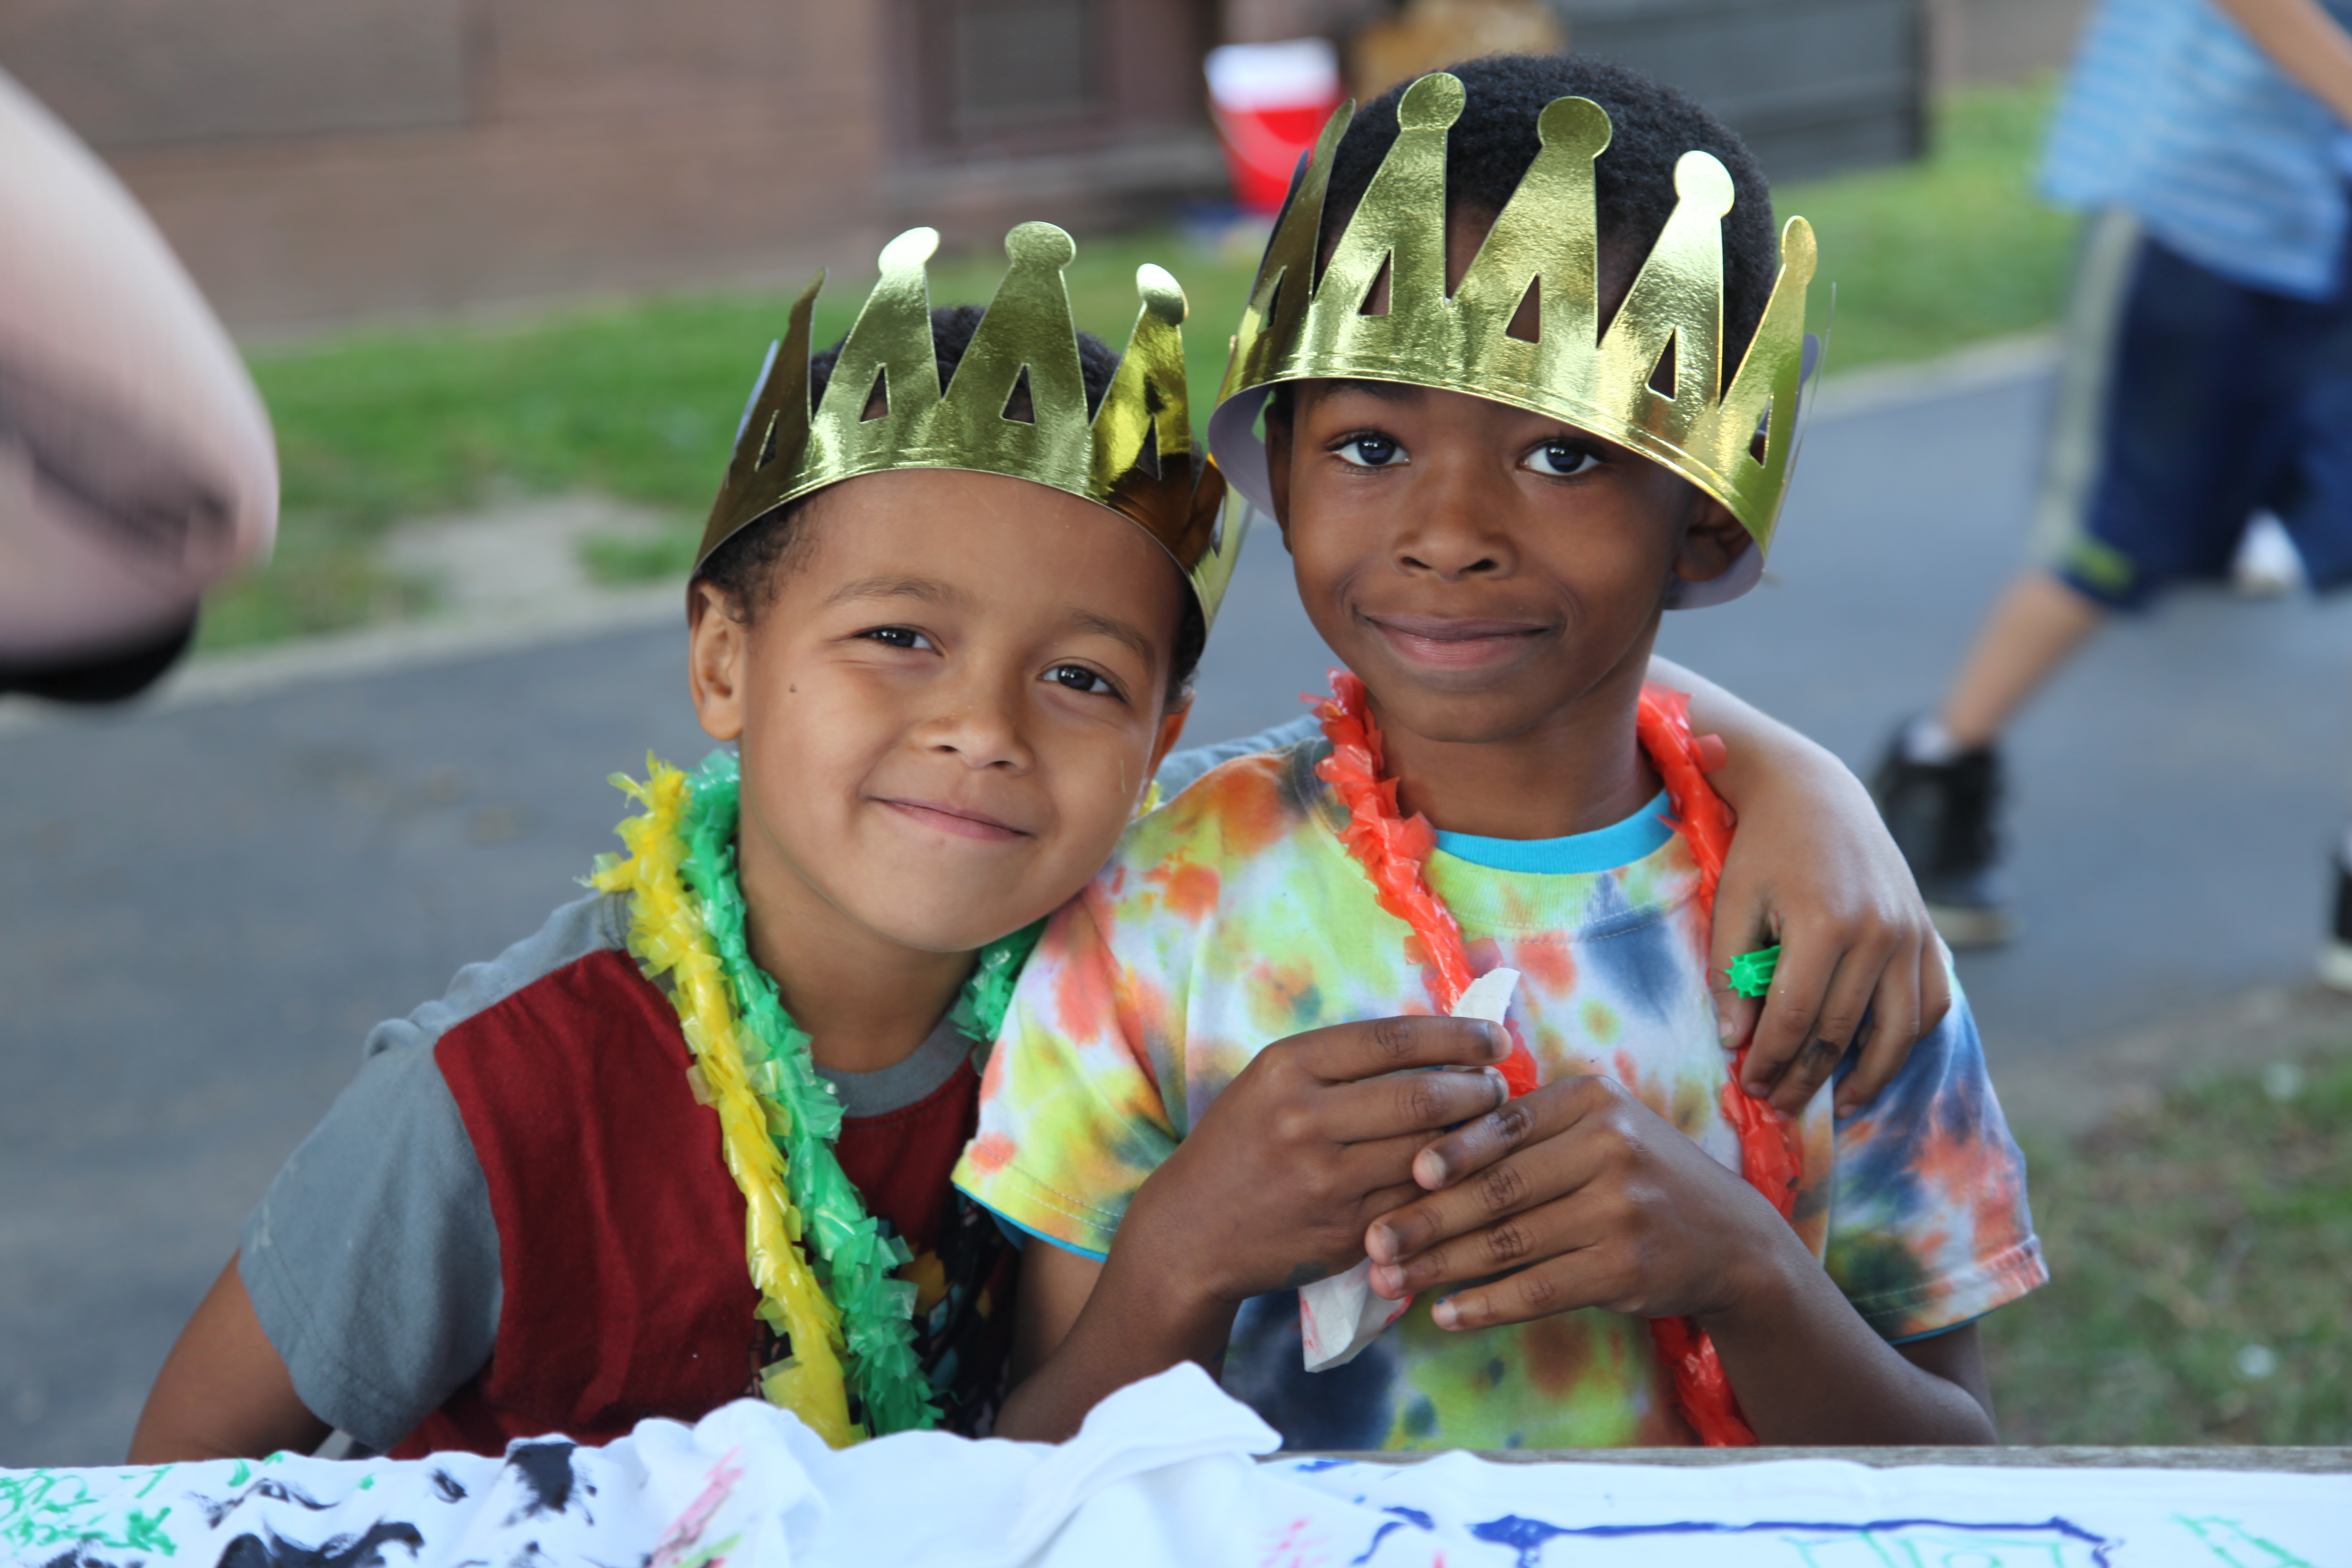 Two boys wearing crowns and leis. The one on the left has his arm around the one on the right.